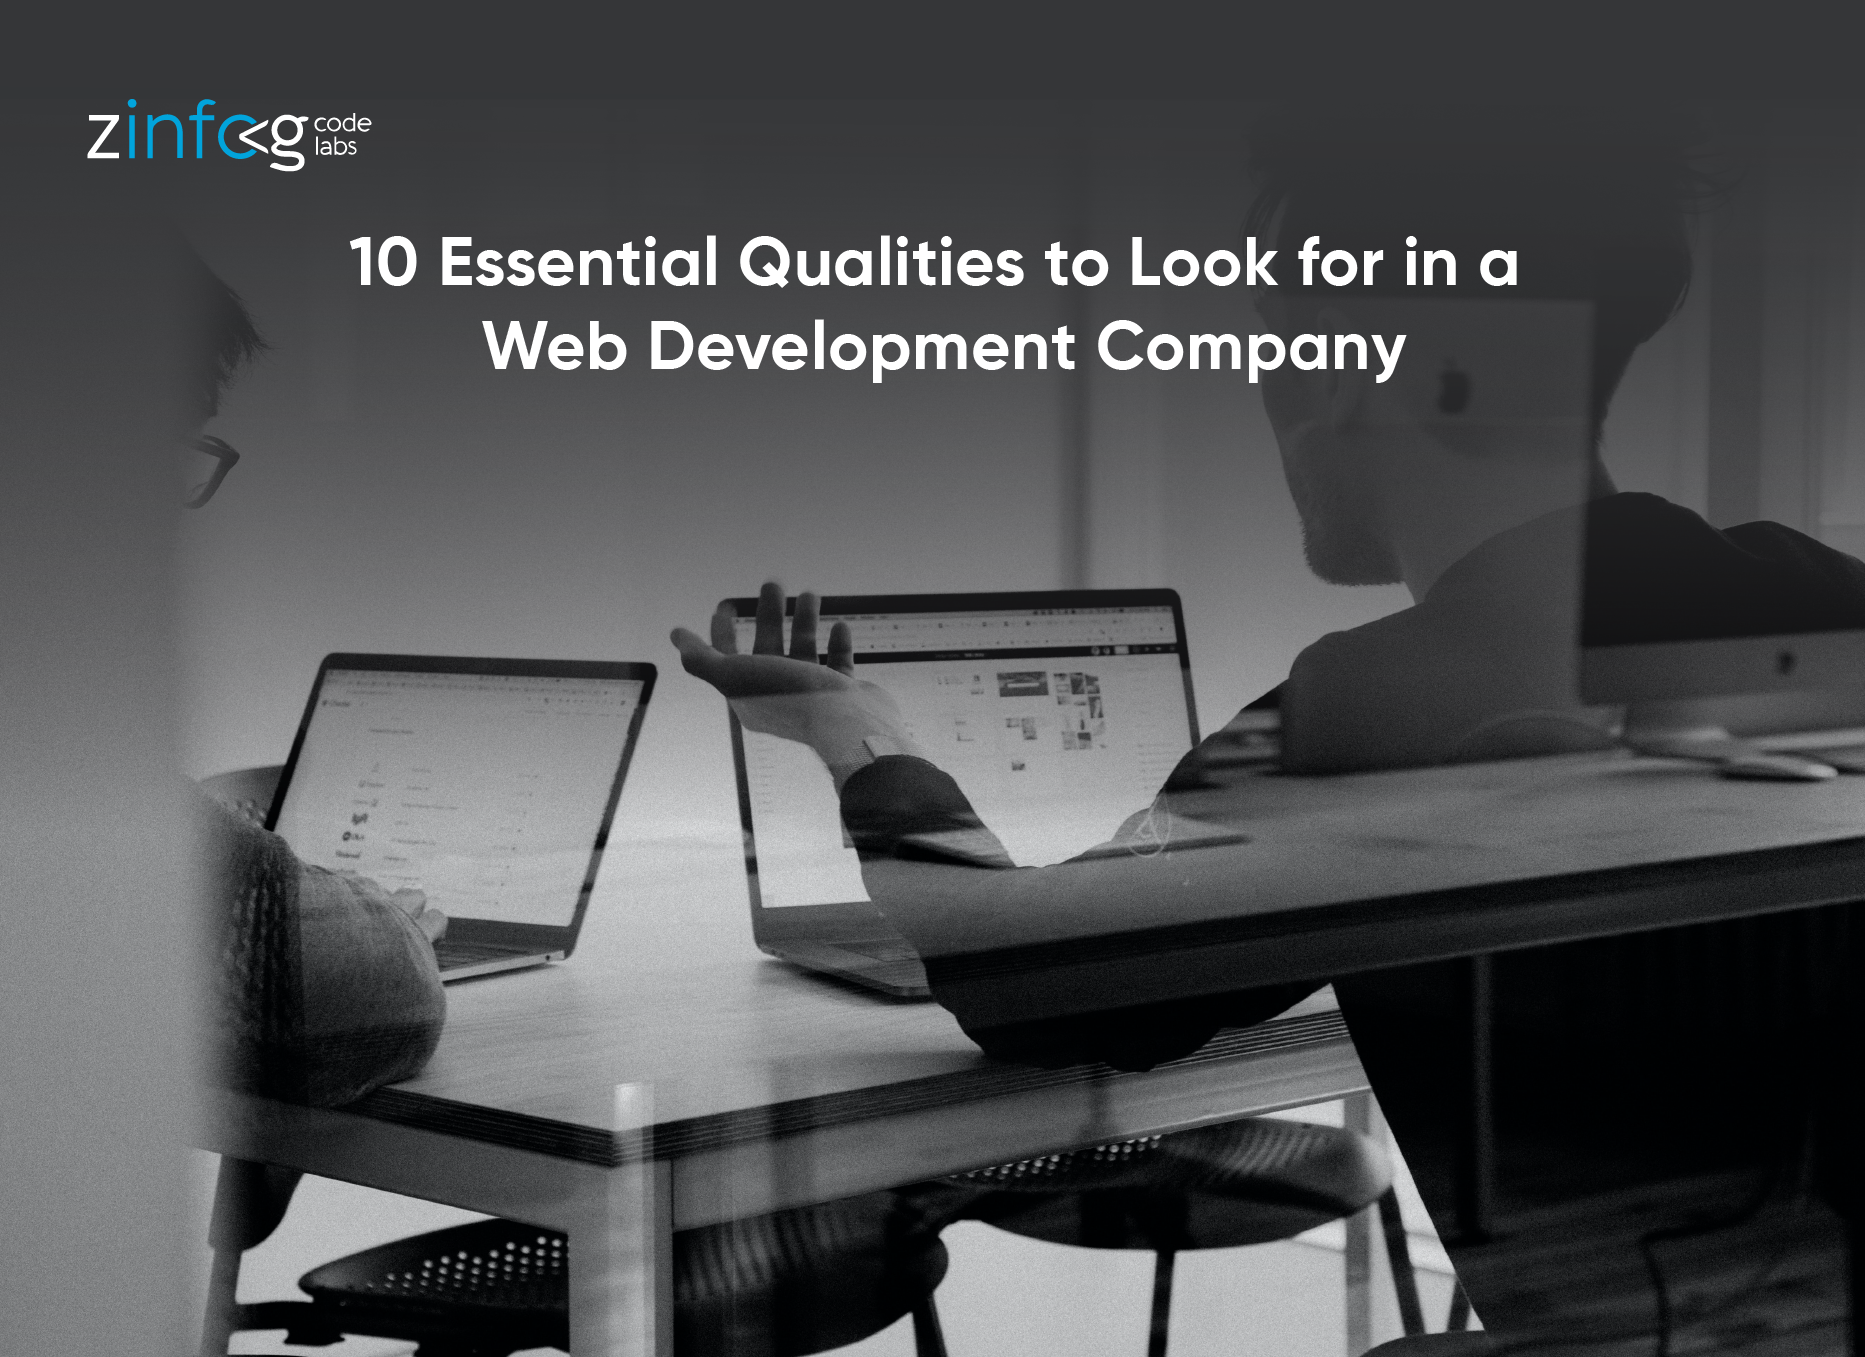 10-essential-qualities-to-look-for-in-a-web-development-company.html